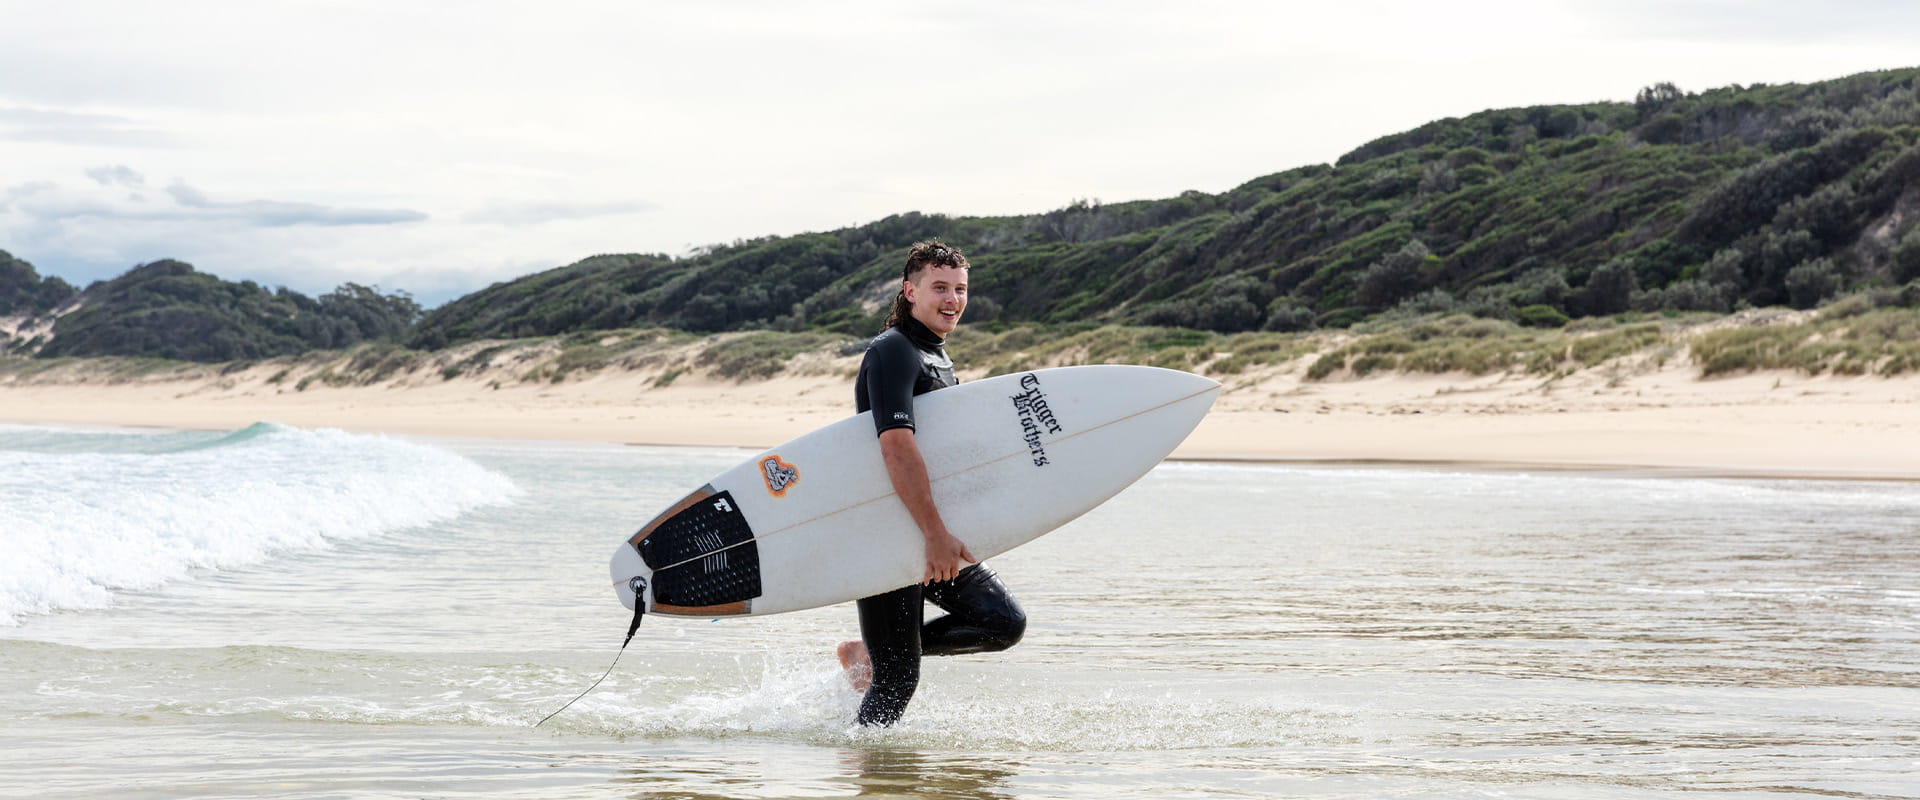 A man wearing a short sleeved wetsuit and carrying a surfboard under his right arm walks through ankle deep water towards a sandy beach with a vegetation-covered sand dunes in the background.